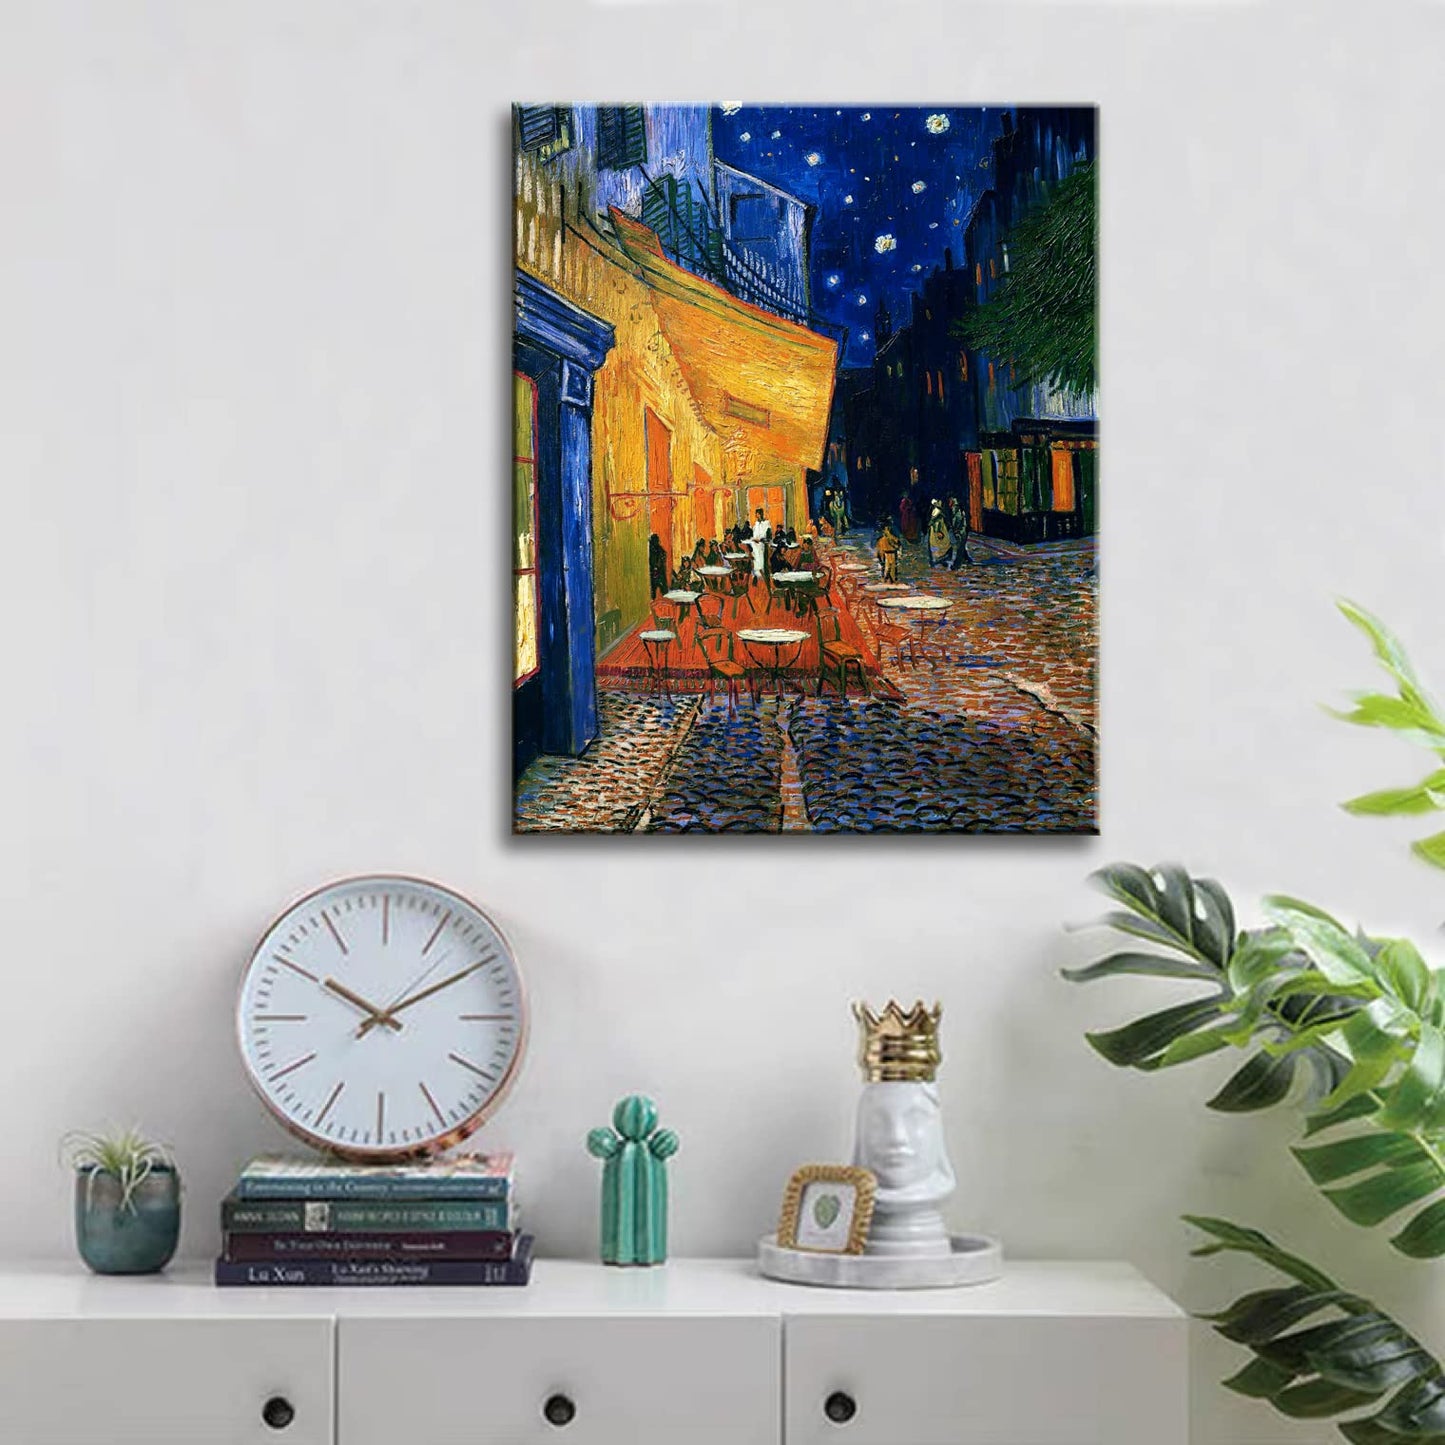 Cafe Terrace At Night by Vincent Van Gogh Canvas Wall Art, Classic Artwork Poster Print for Bedroom Bathroom Decor - 12"x15"